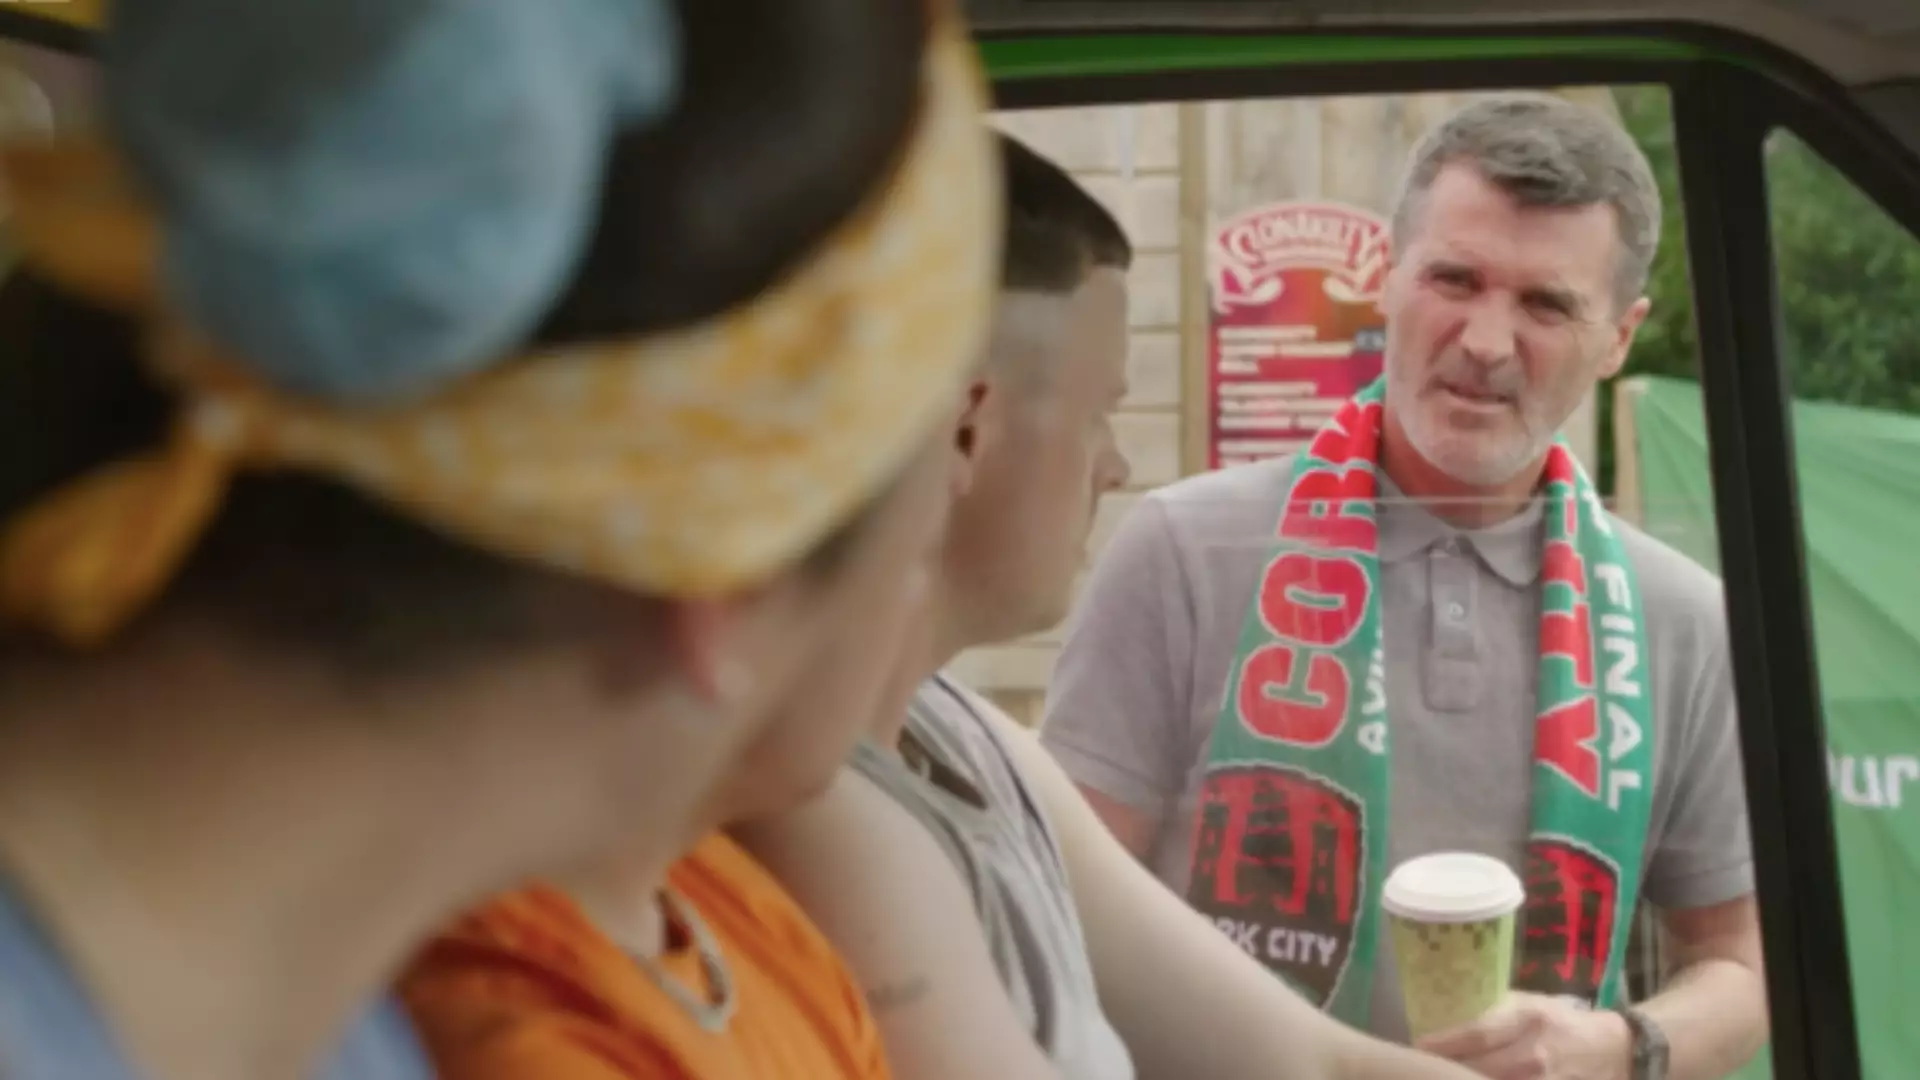 Manchester United Legend Roy Keane Told To 'F**k Off' In Irish Comedy Show The Young Offenders